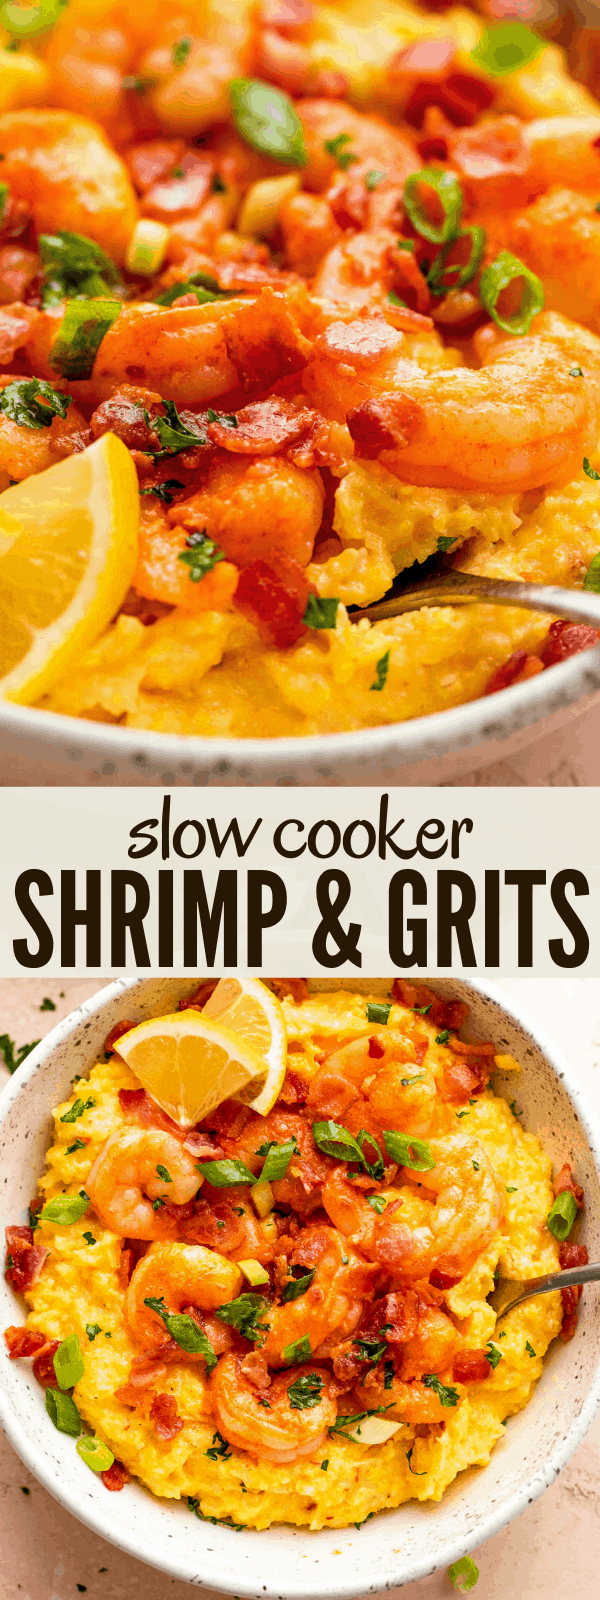 The Best Slow Cooker Shrimp and Grits Recipe | Diethood